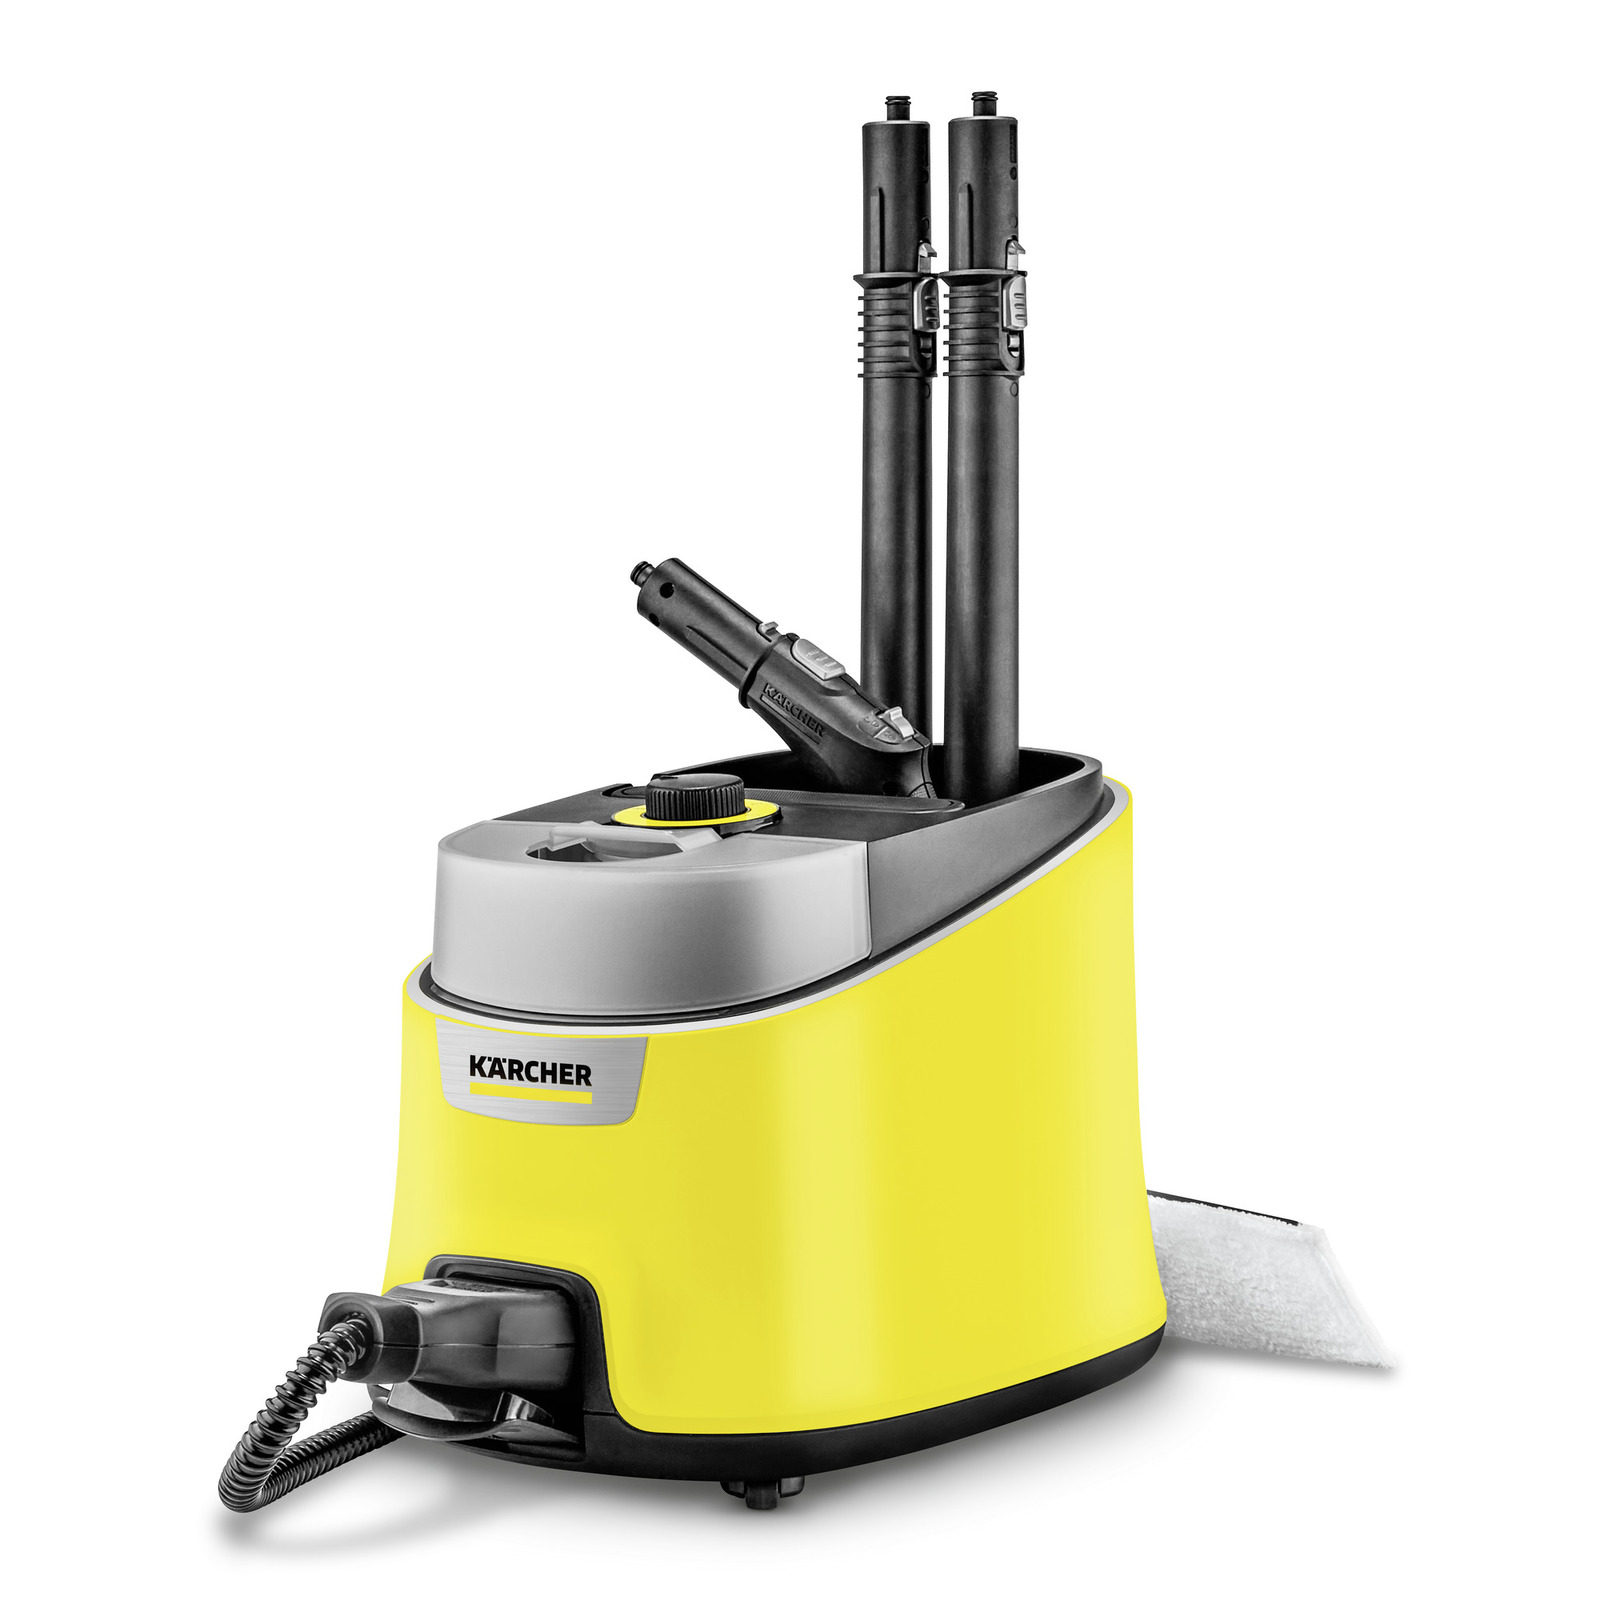 Karcher SC4.100CB Compact Steam Cleaner with Iron on Vimeo